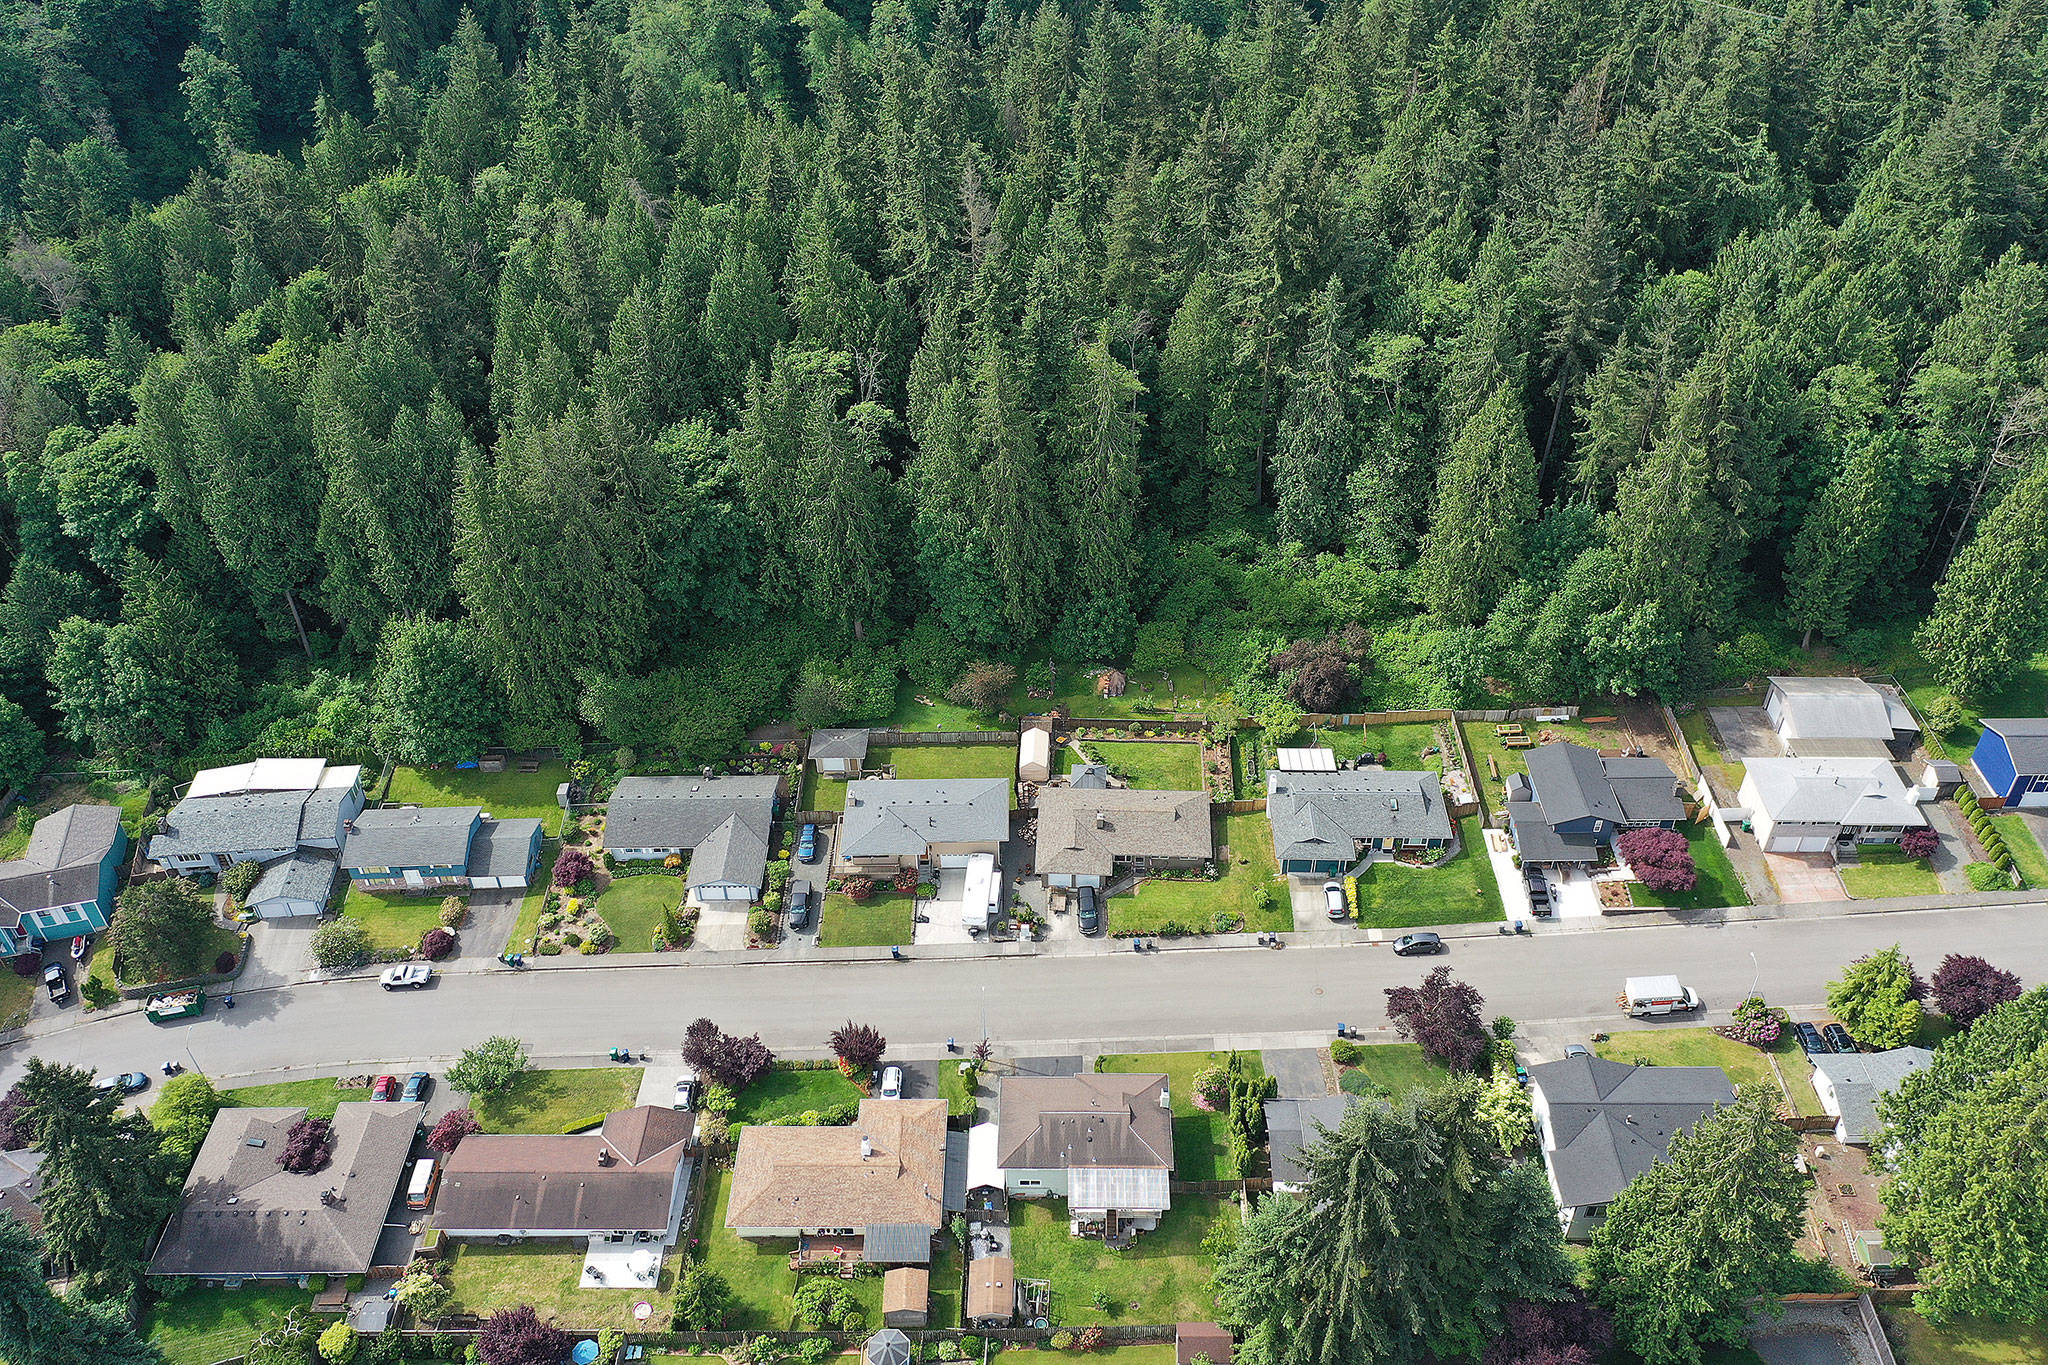 The Valley View neighborhood of Everett abuts the Wood Creek drainage, which the city and environmental non-profit Forterra plan to evaluate further this year. (Chuck Taylor / Herald file)